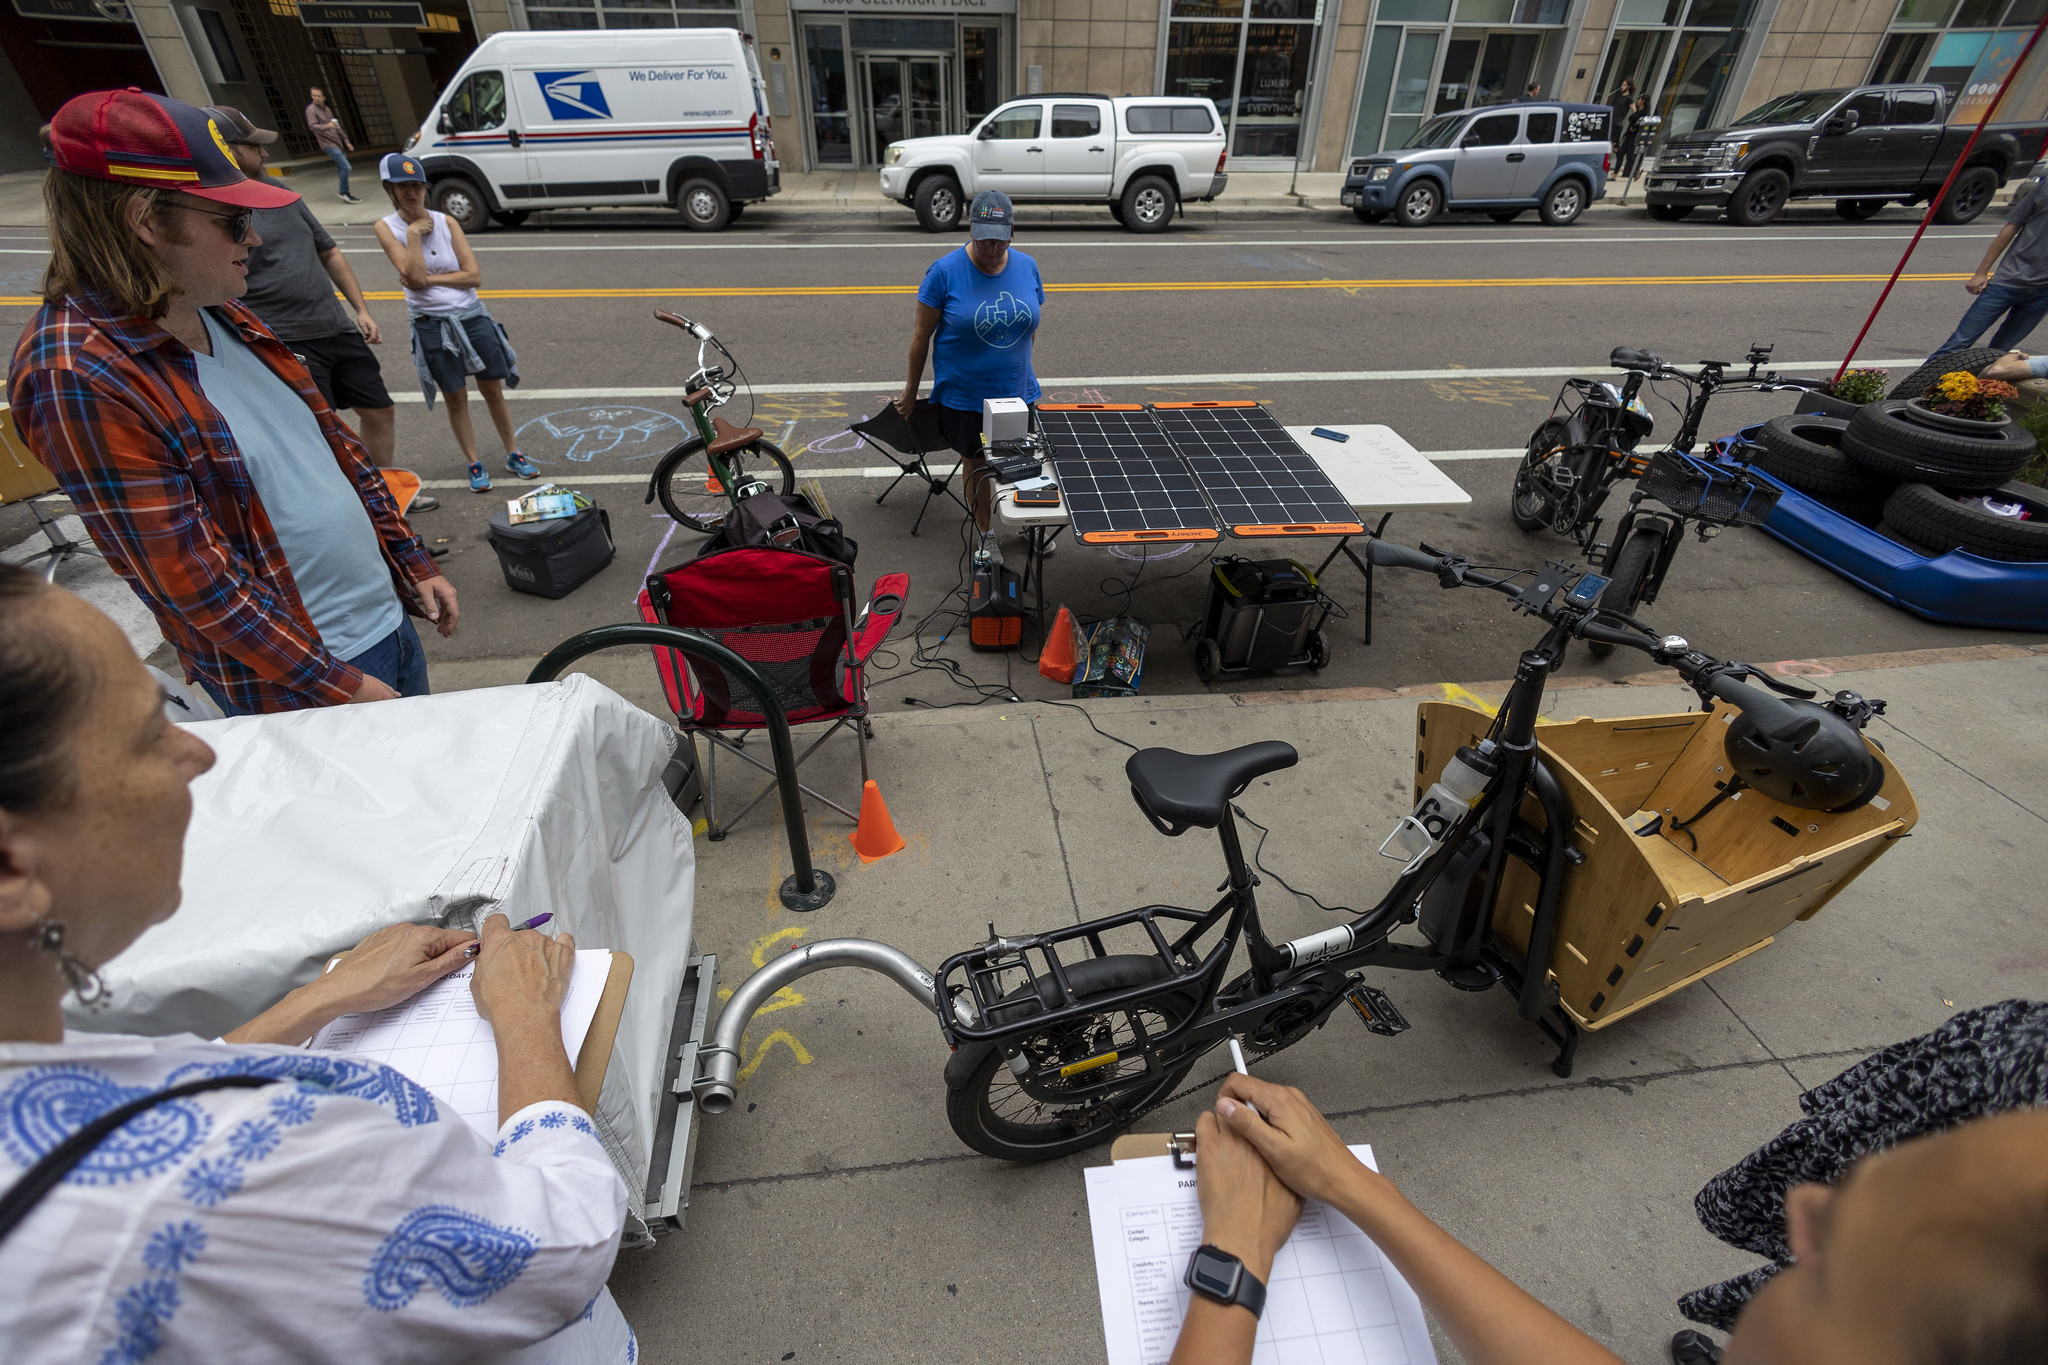 A solar-powered eBike charging station on a table in a street parking space. There are eBikes and people milling about.